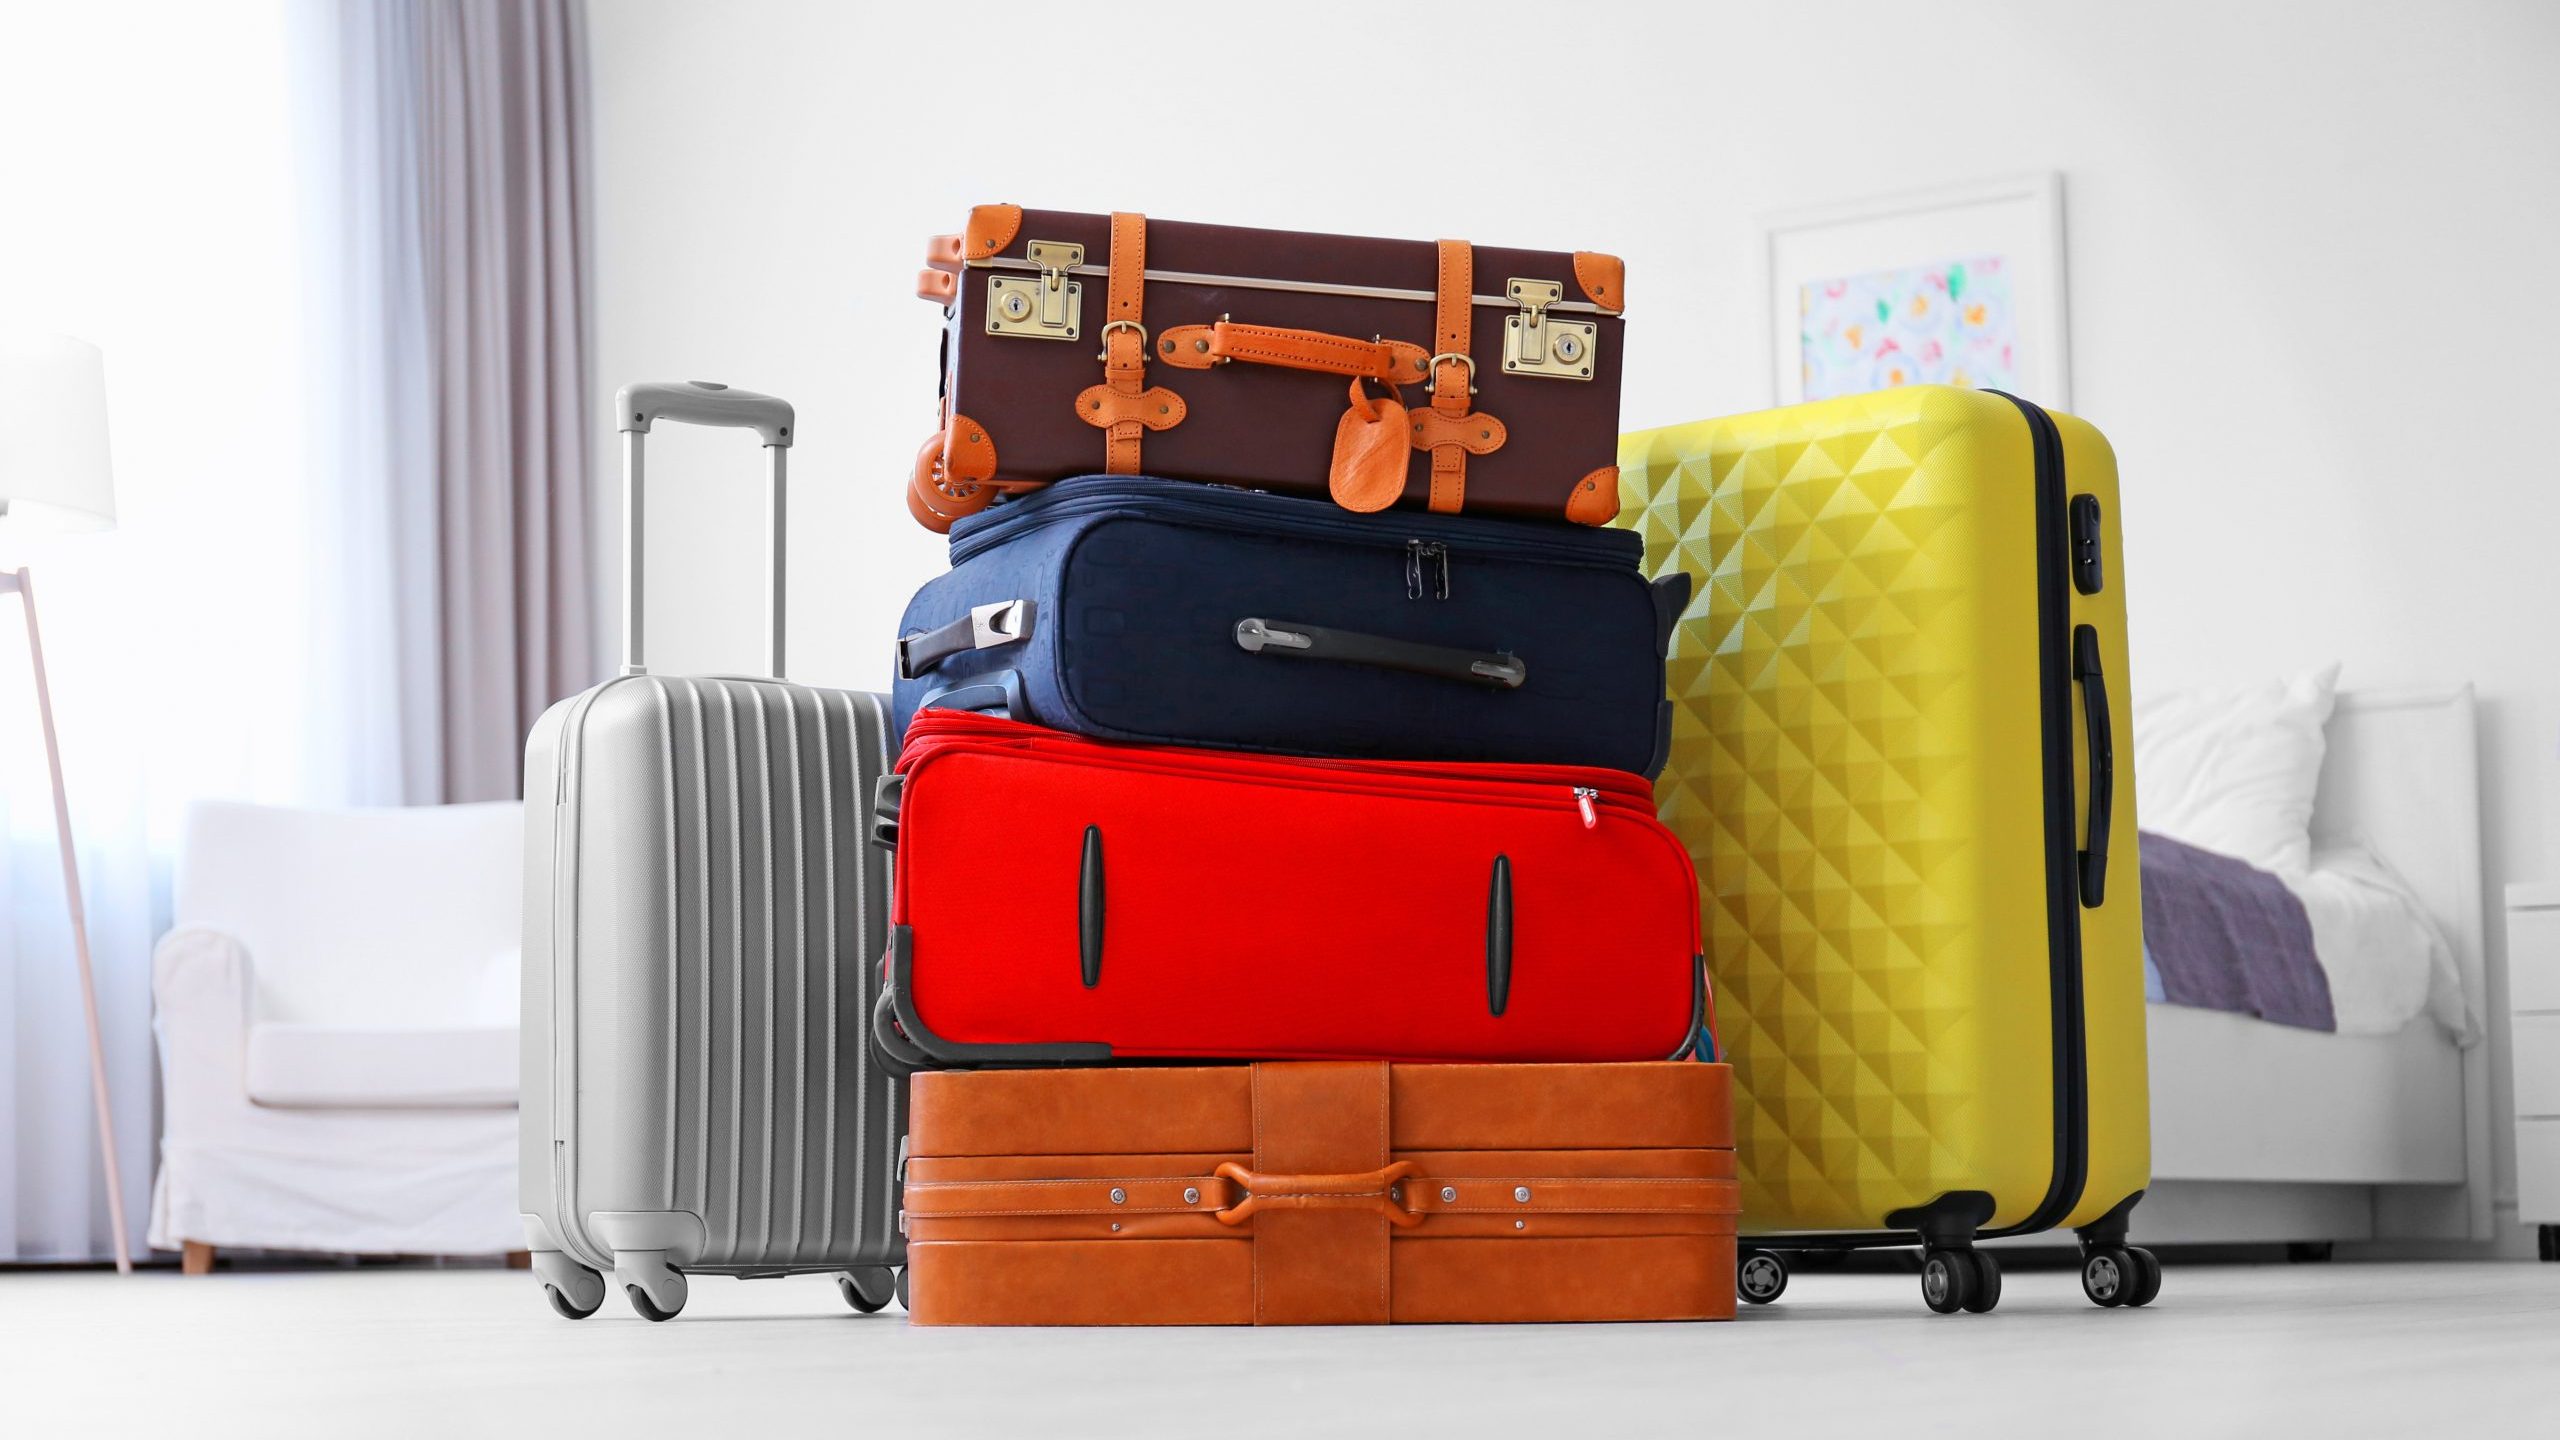 Reliable & Safe - Pick Up Luggage From Your Home + More